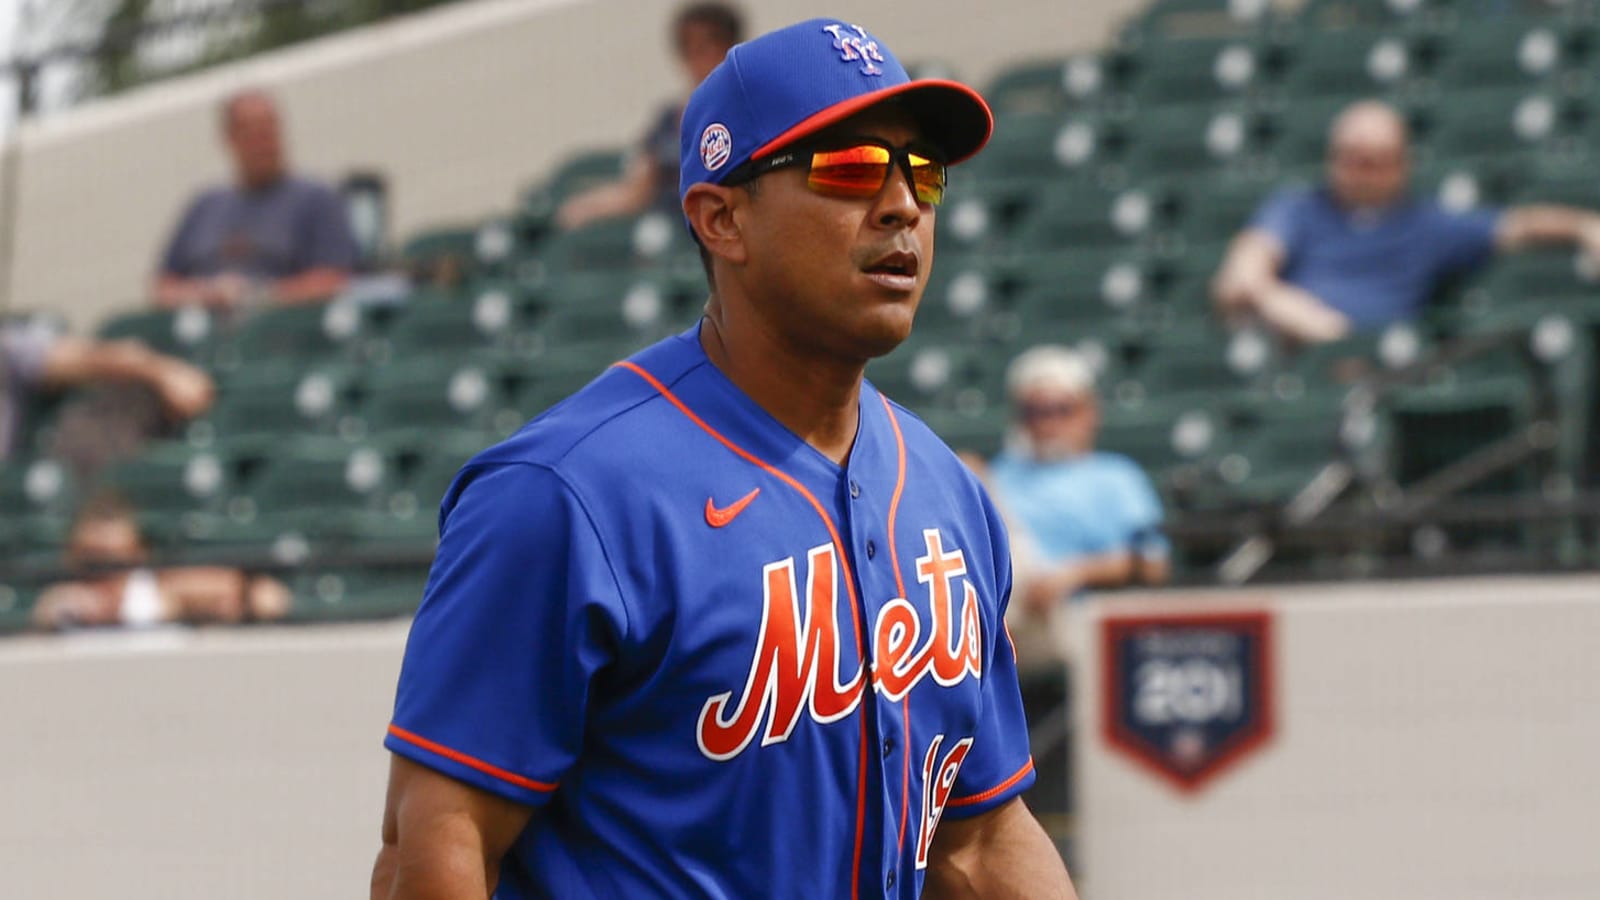 Mets likely to keep Rojas as manager